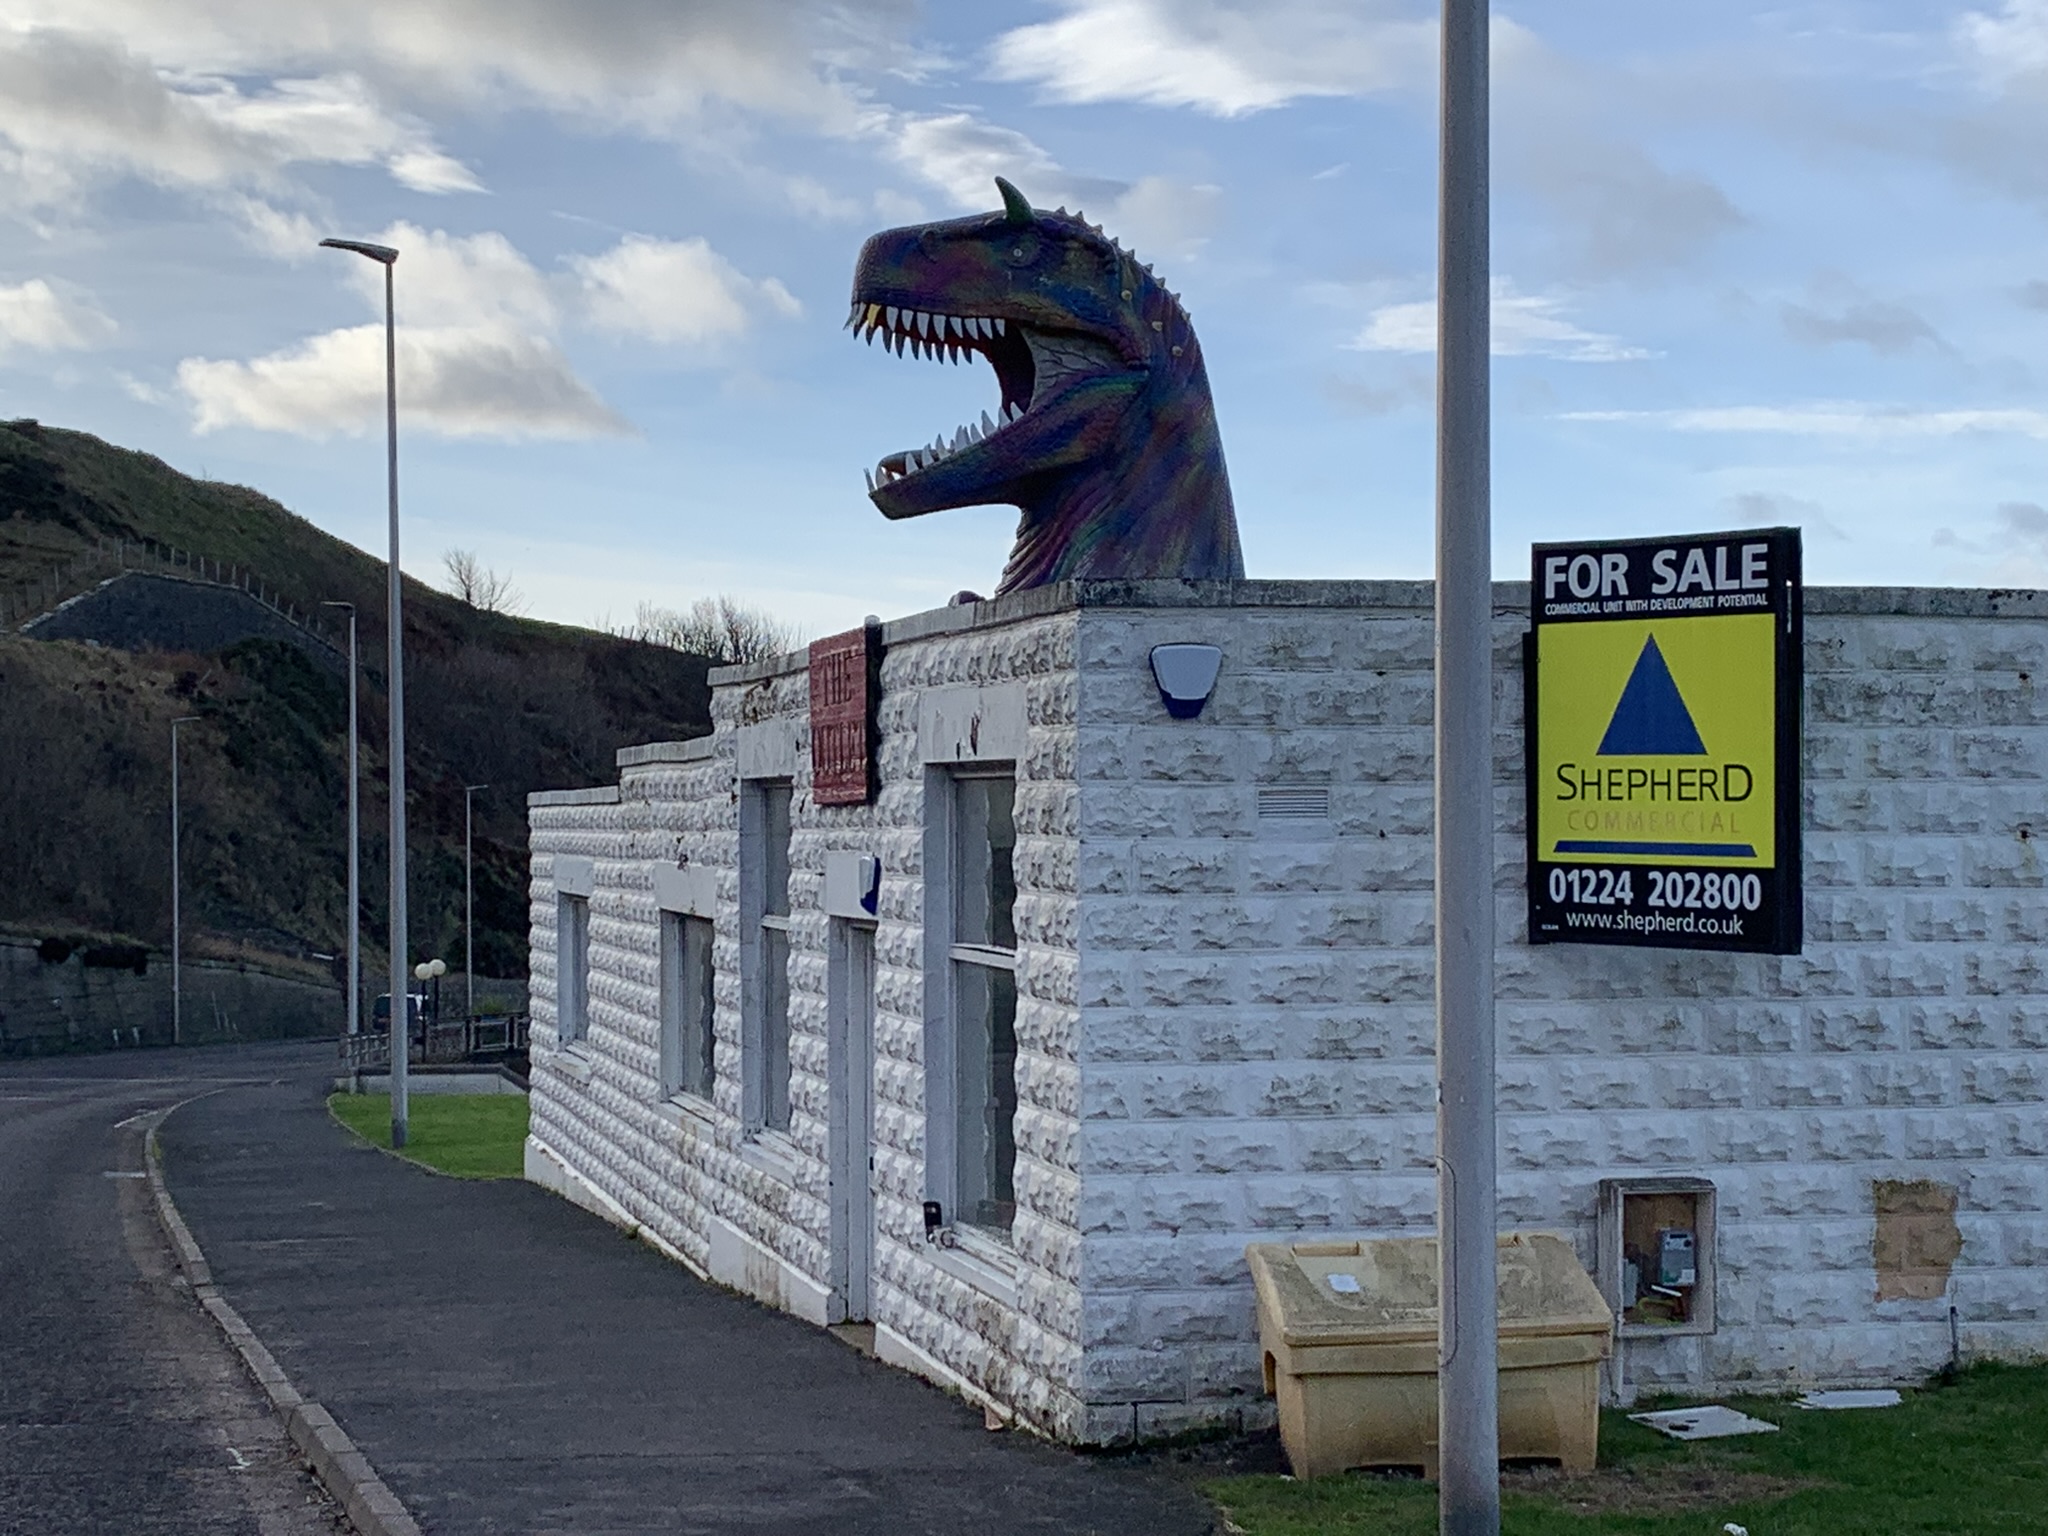 And finally... Dinosaur building in Cullen to go under the hammer